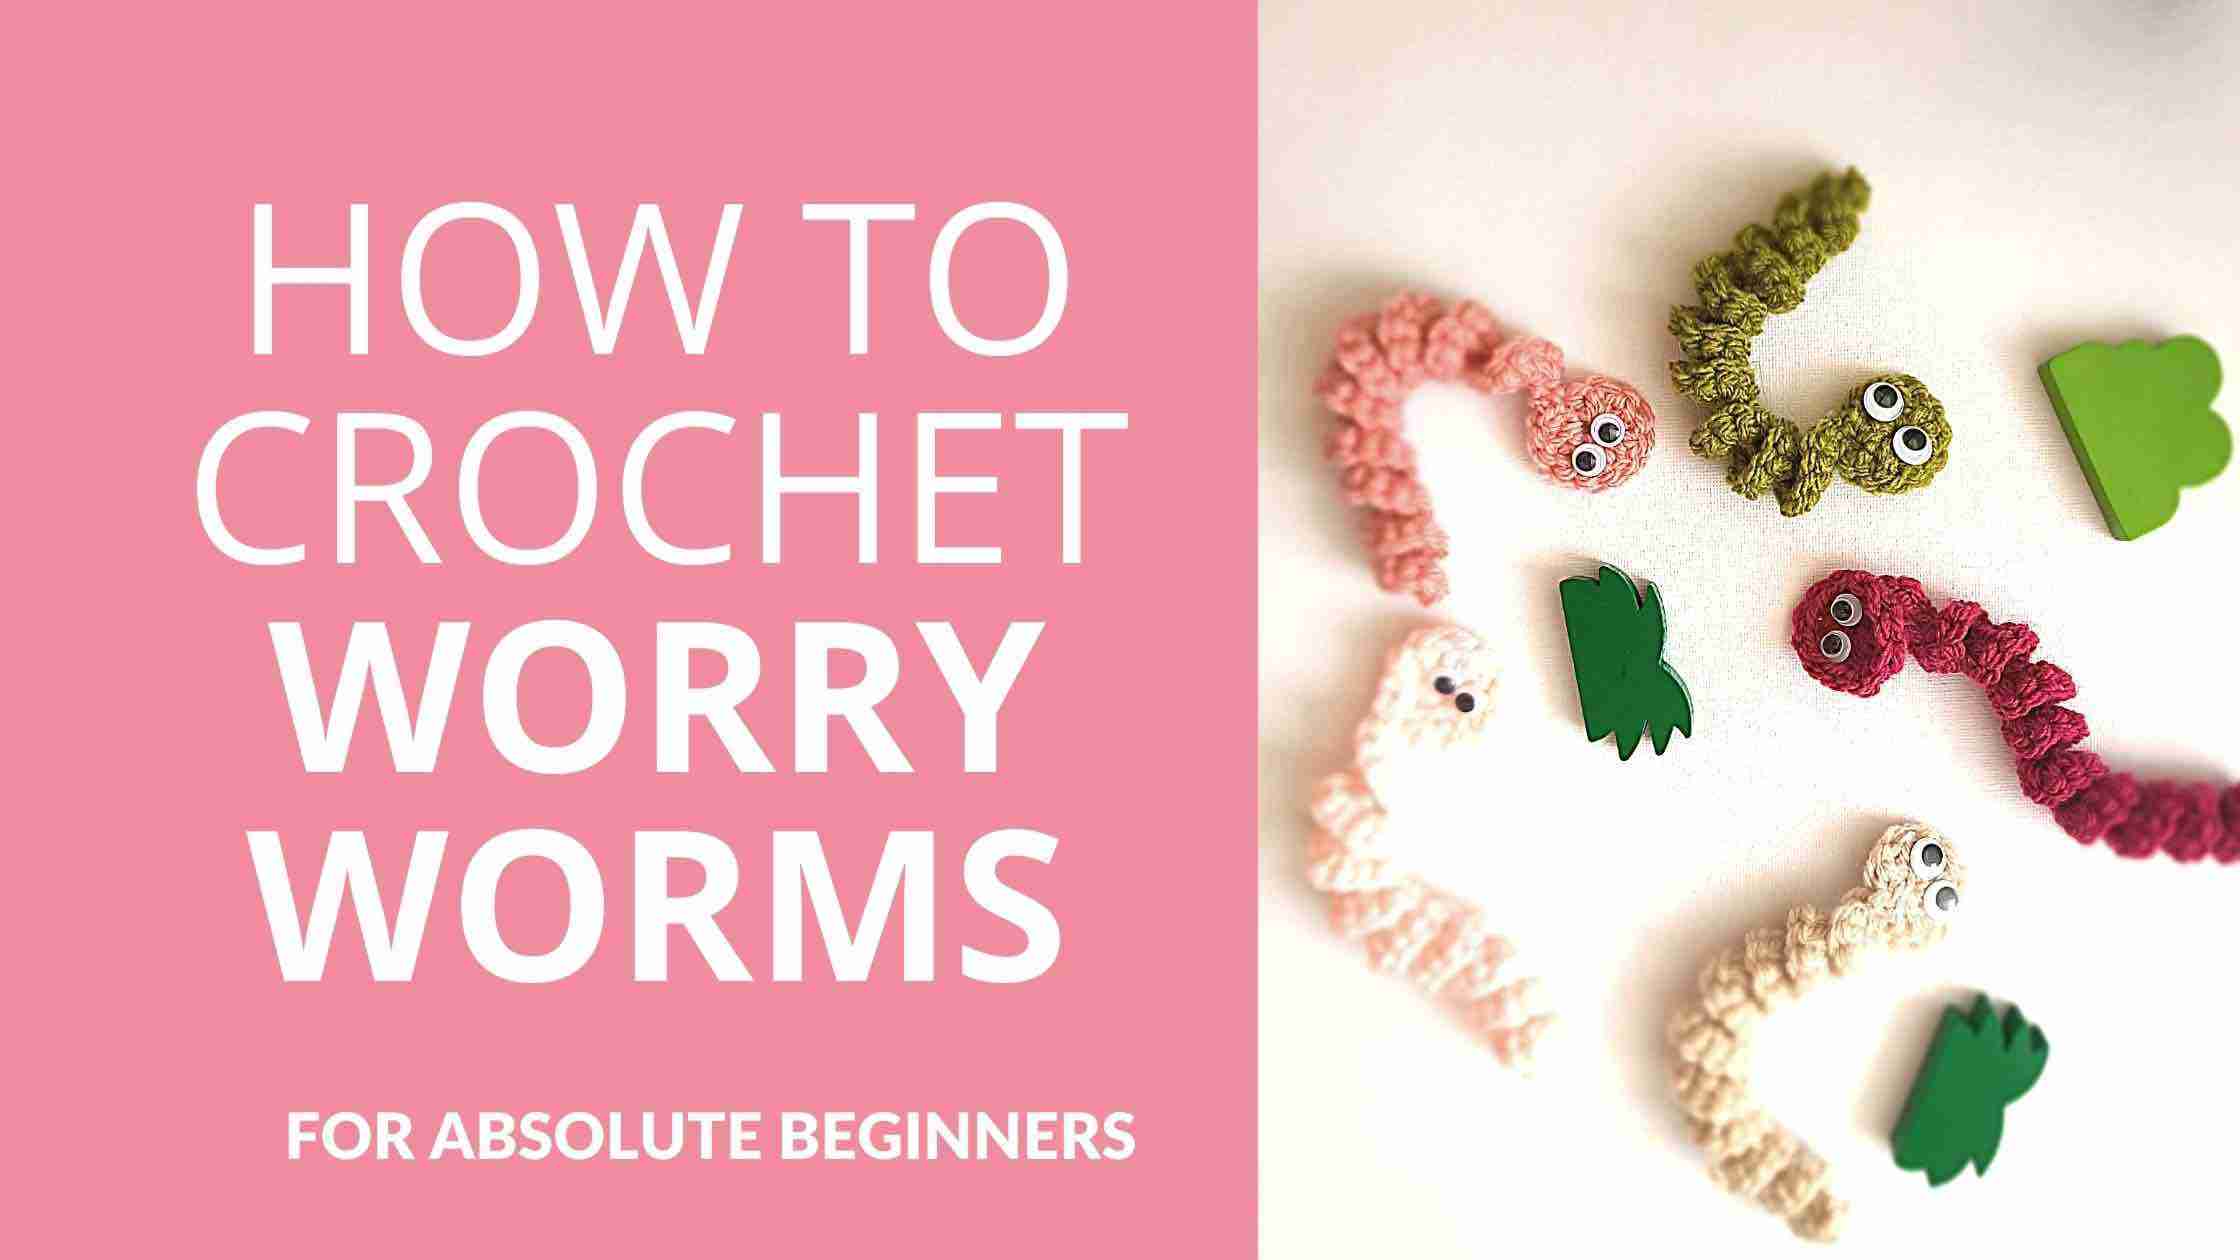 How to crochet worry worms